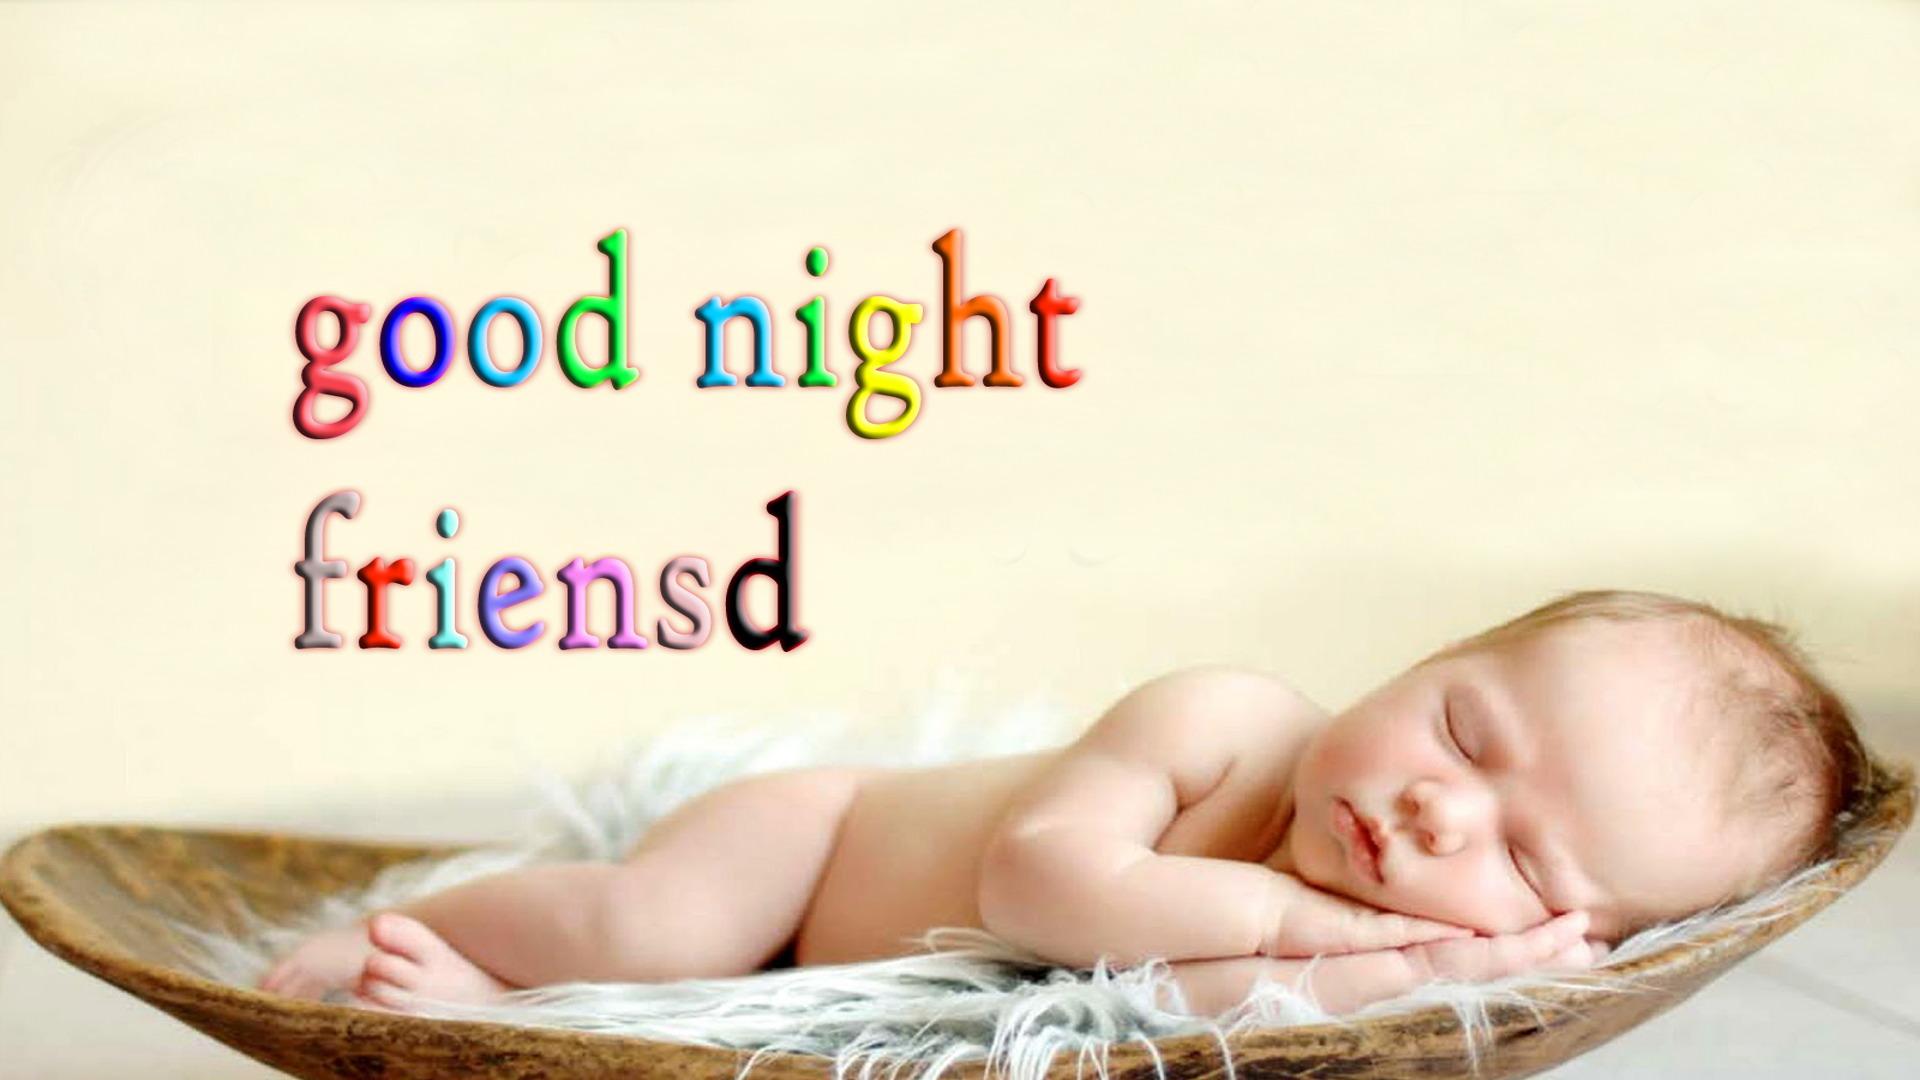 good night with cute baby HD wallpaper (13) Sayings